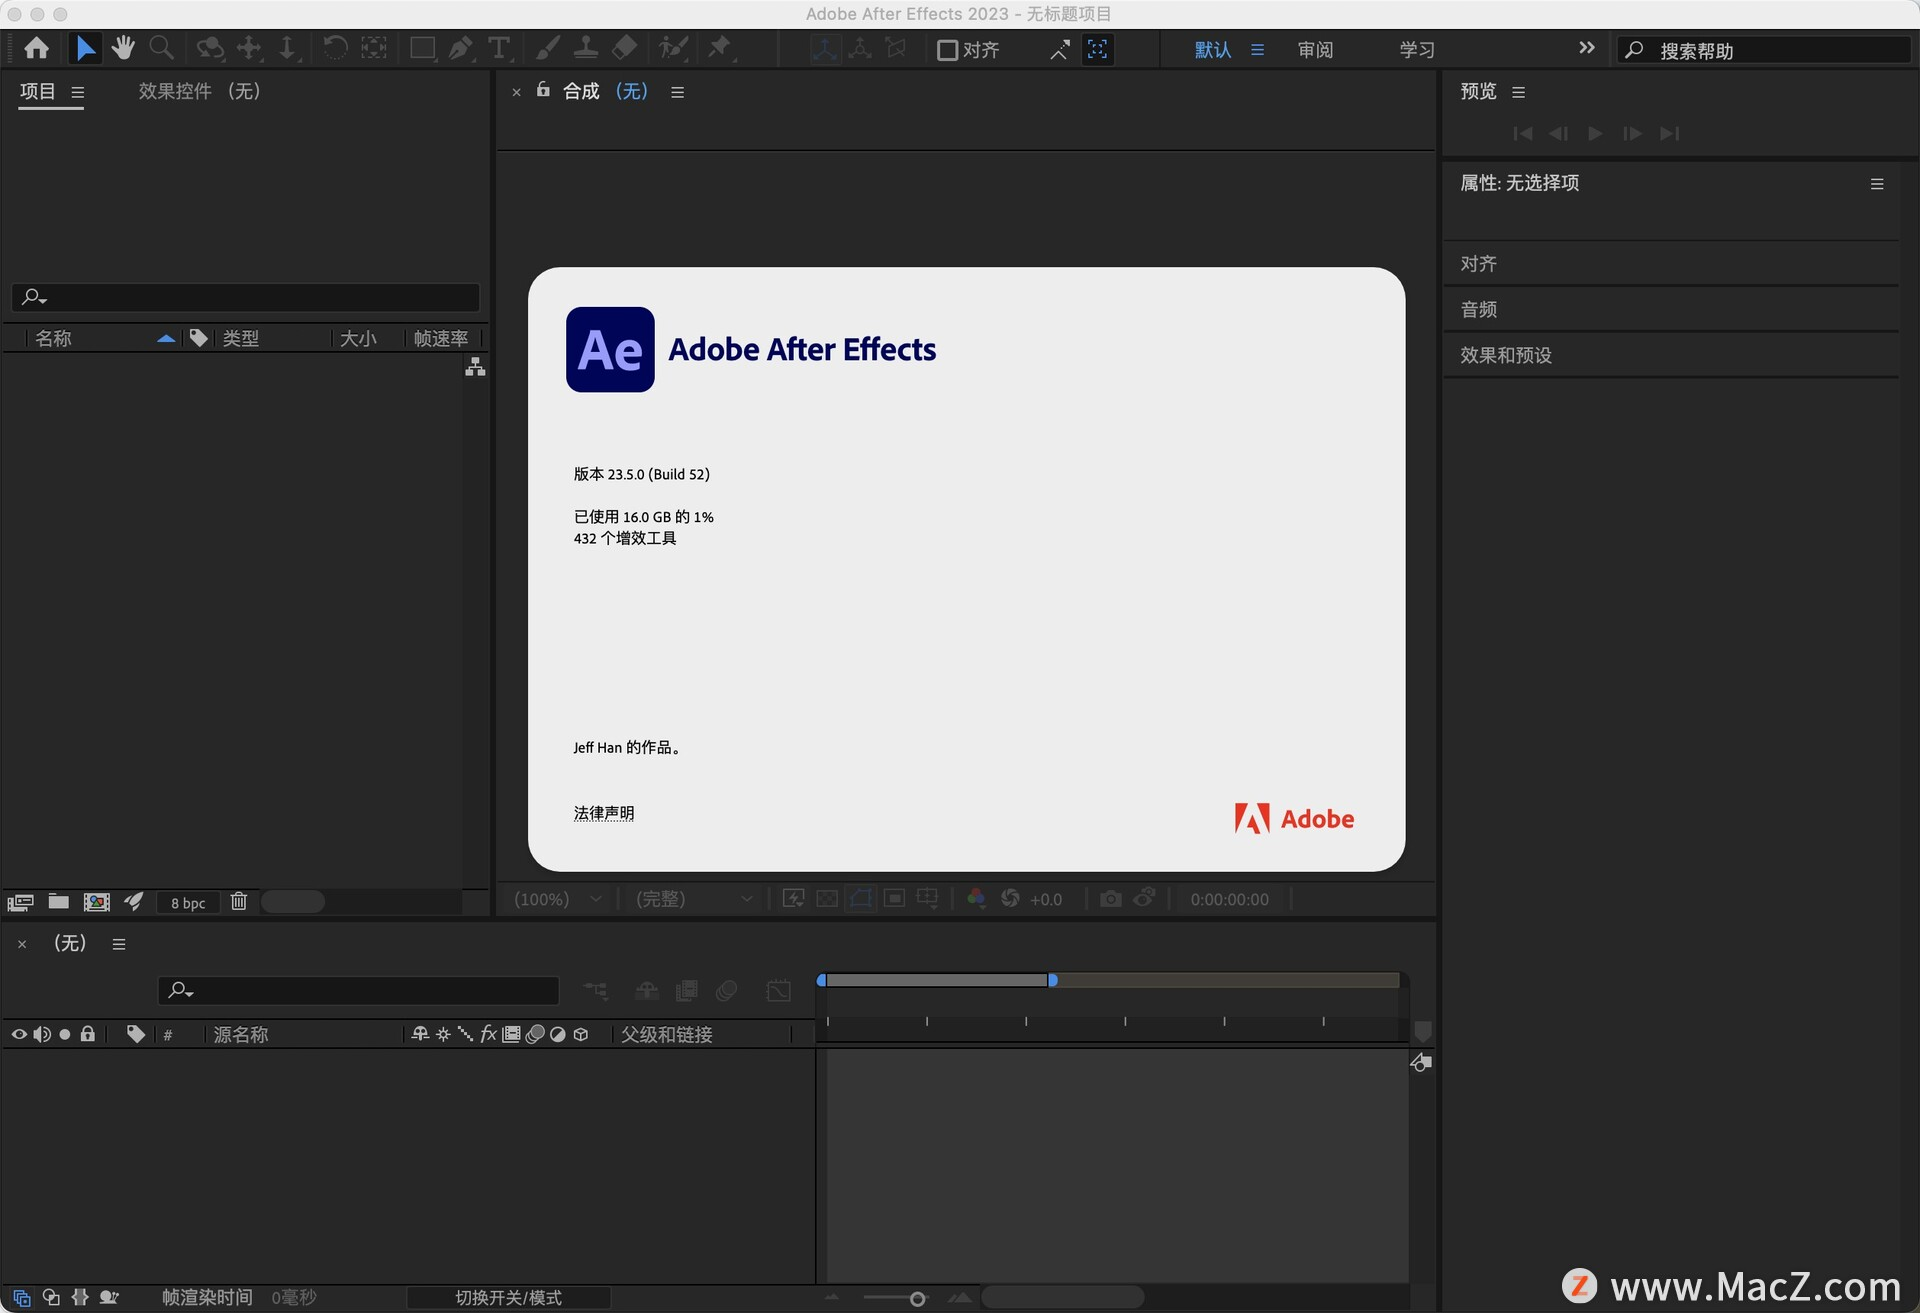 After Effects 2023 for mac最新密钥激活可用 附 After Effects 2023图文安装激活教程